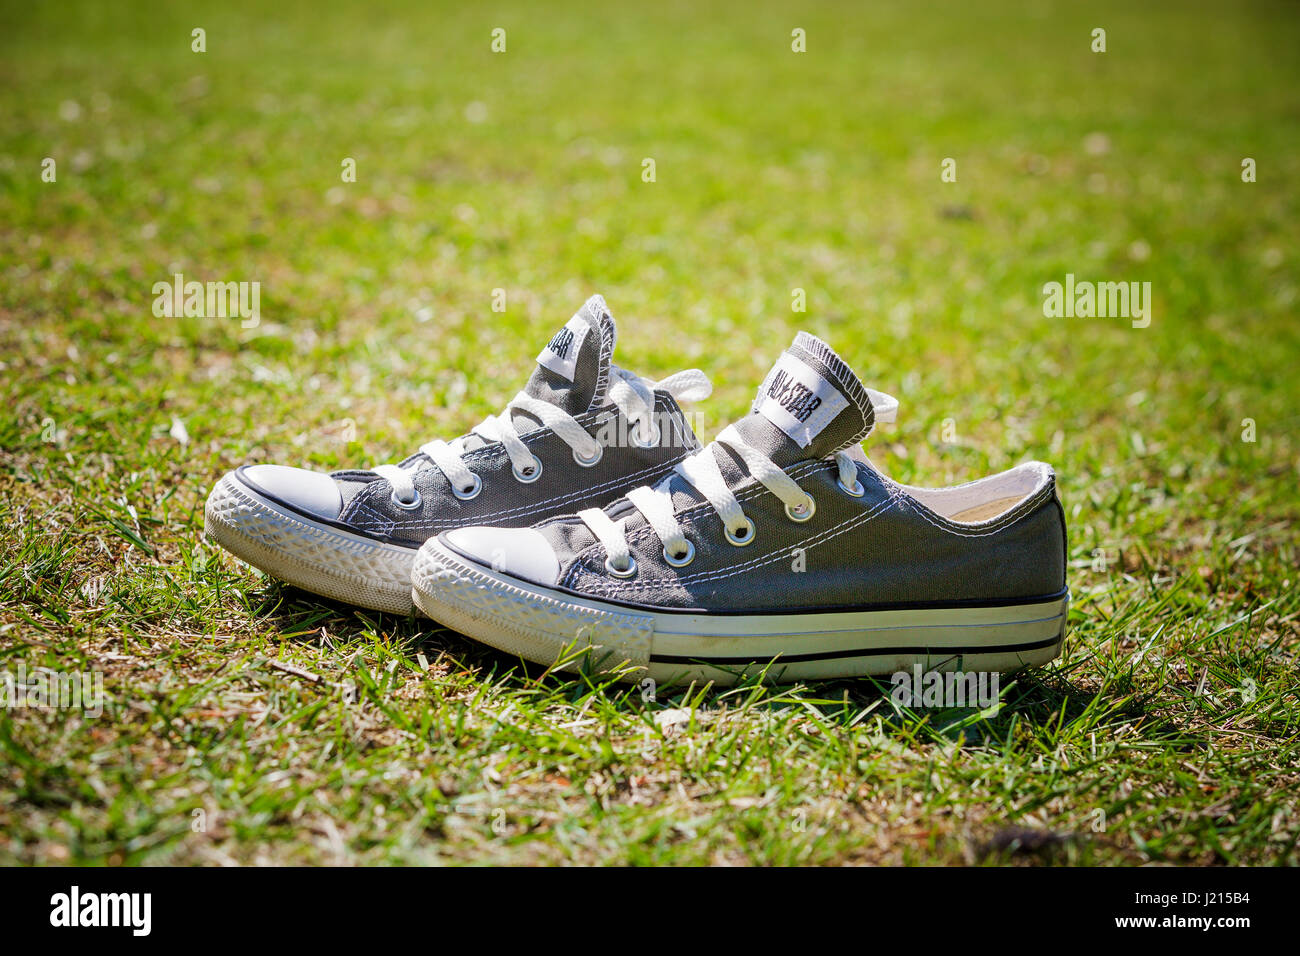 NEW FOREST, UK - 9 June 2013 - Converse All Star pumps discarded on the  lawn. Fashion pumps, very popular with the youth culture. On 9 June 2013  New F Stock Photo - Alamy